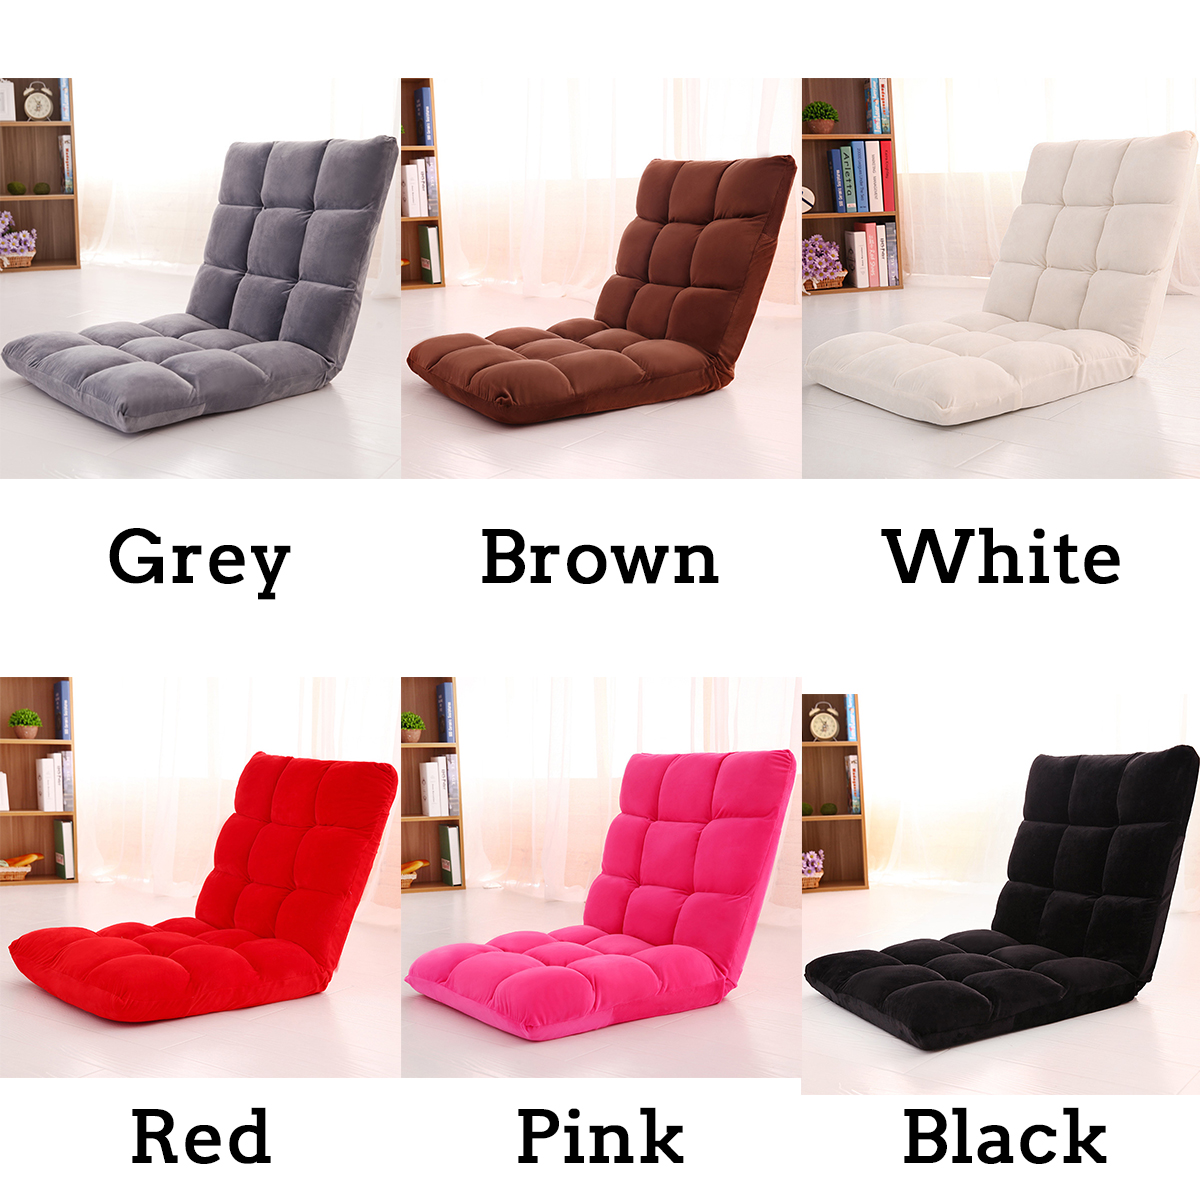 Adjustable Lazy Sofa Cushioned Floor Lounge Chair Living Room Leisure Chaise Chair 13